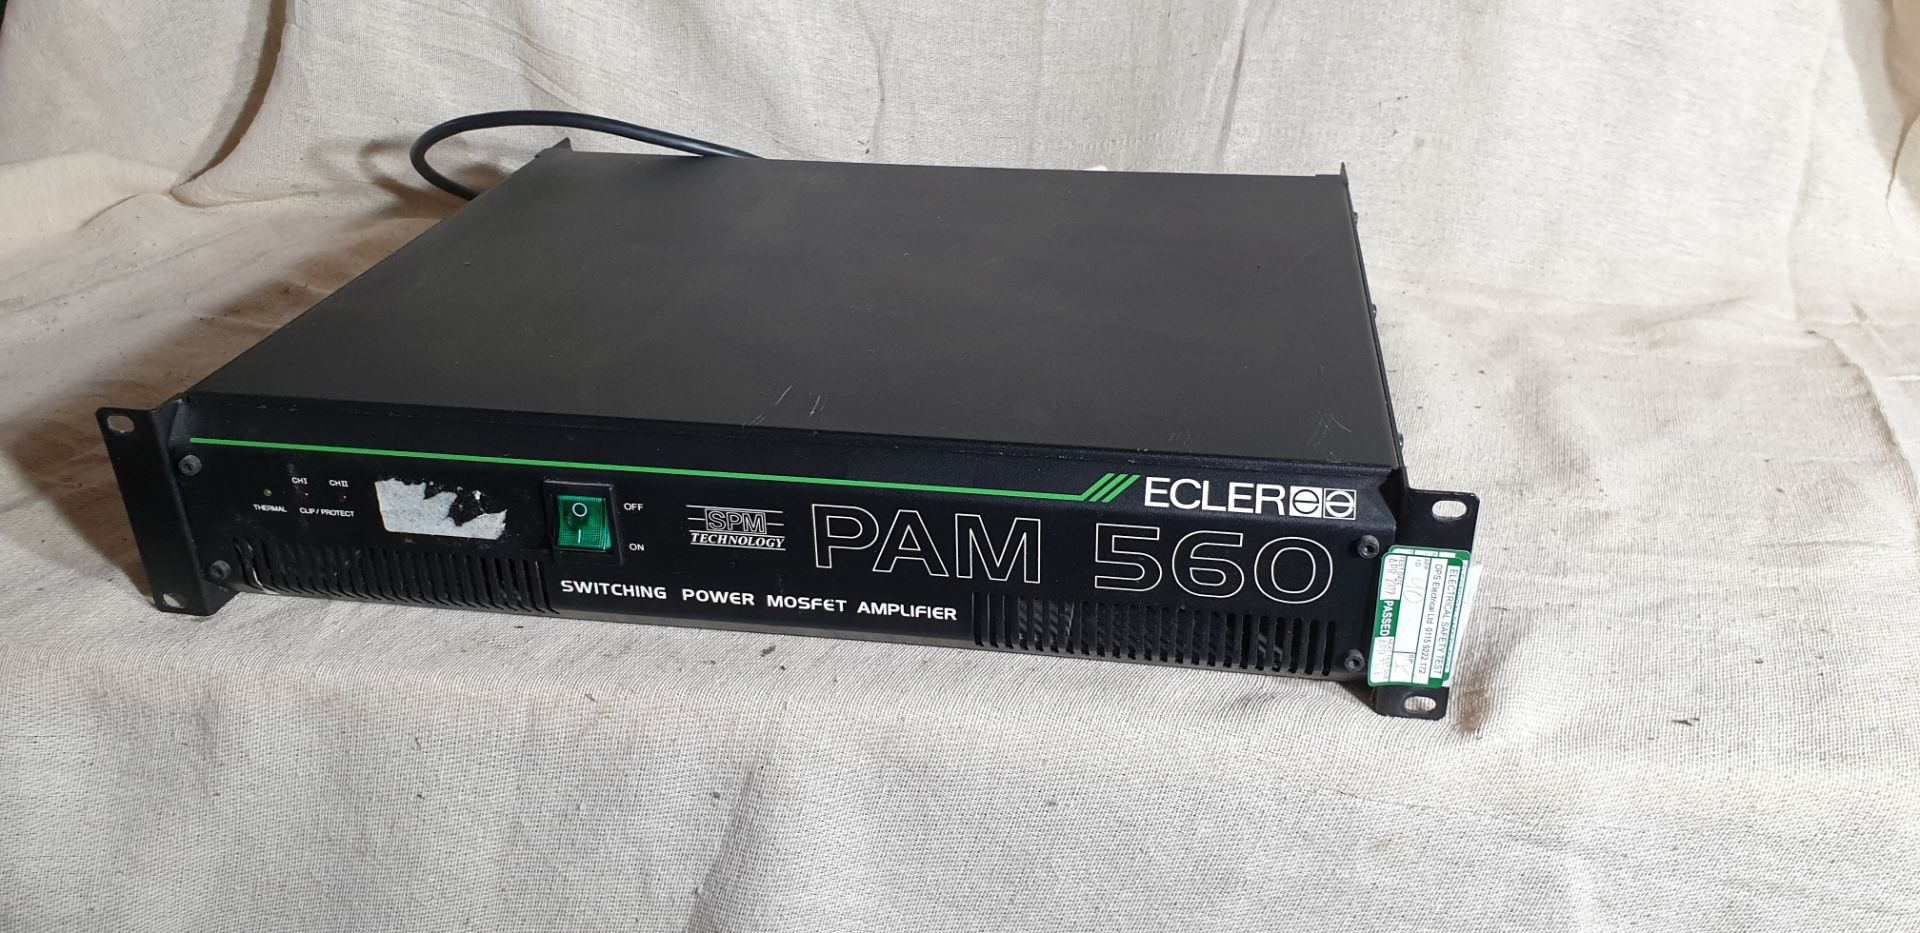 1 ; ECLER Pam 560 Switching Power Mosfet Amplifier.